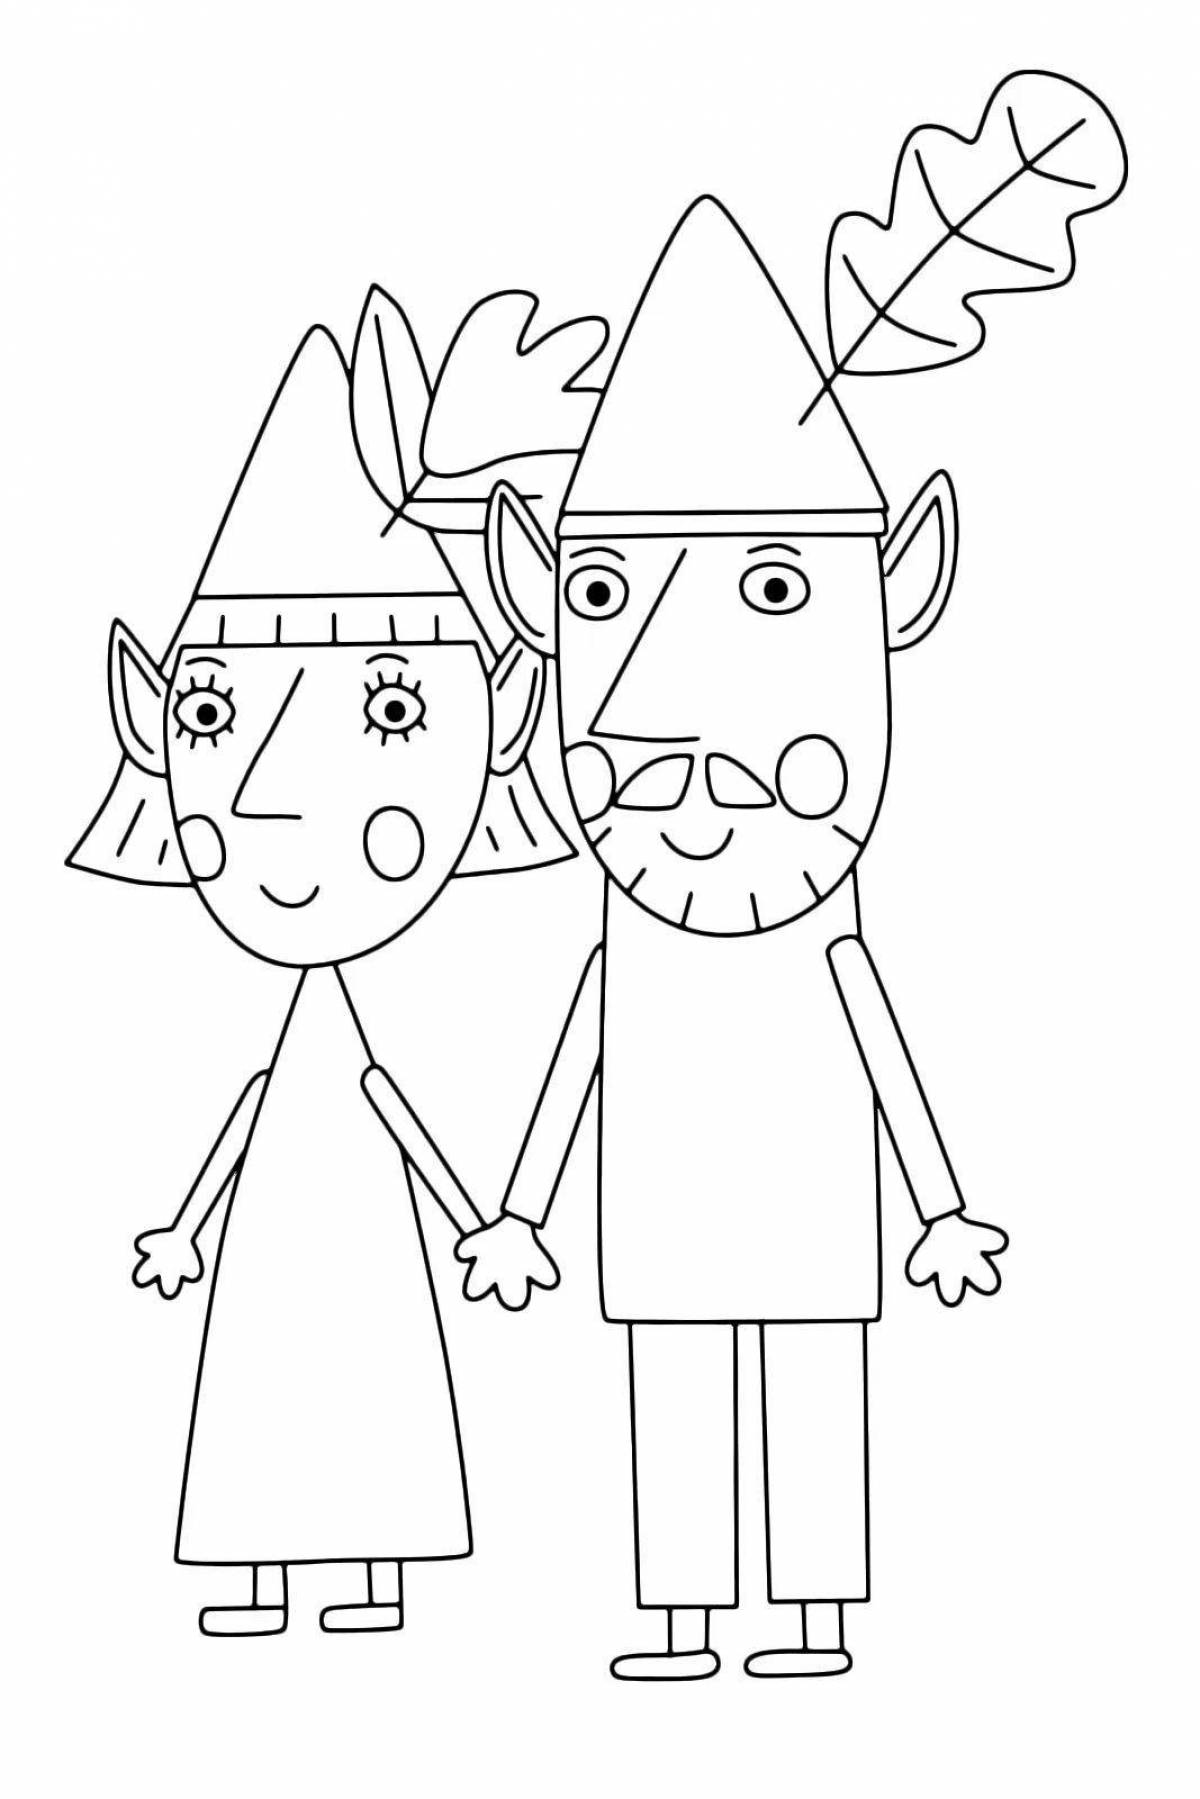 Exciting ben and holly's little kingdom coloring book